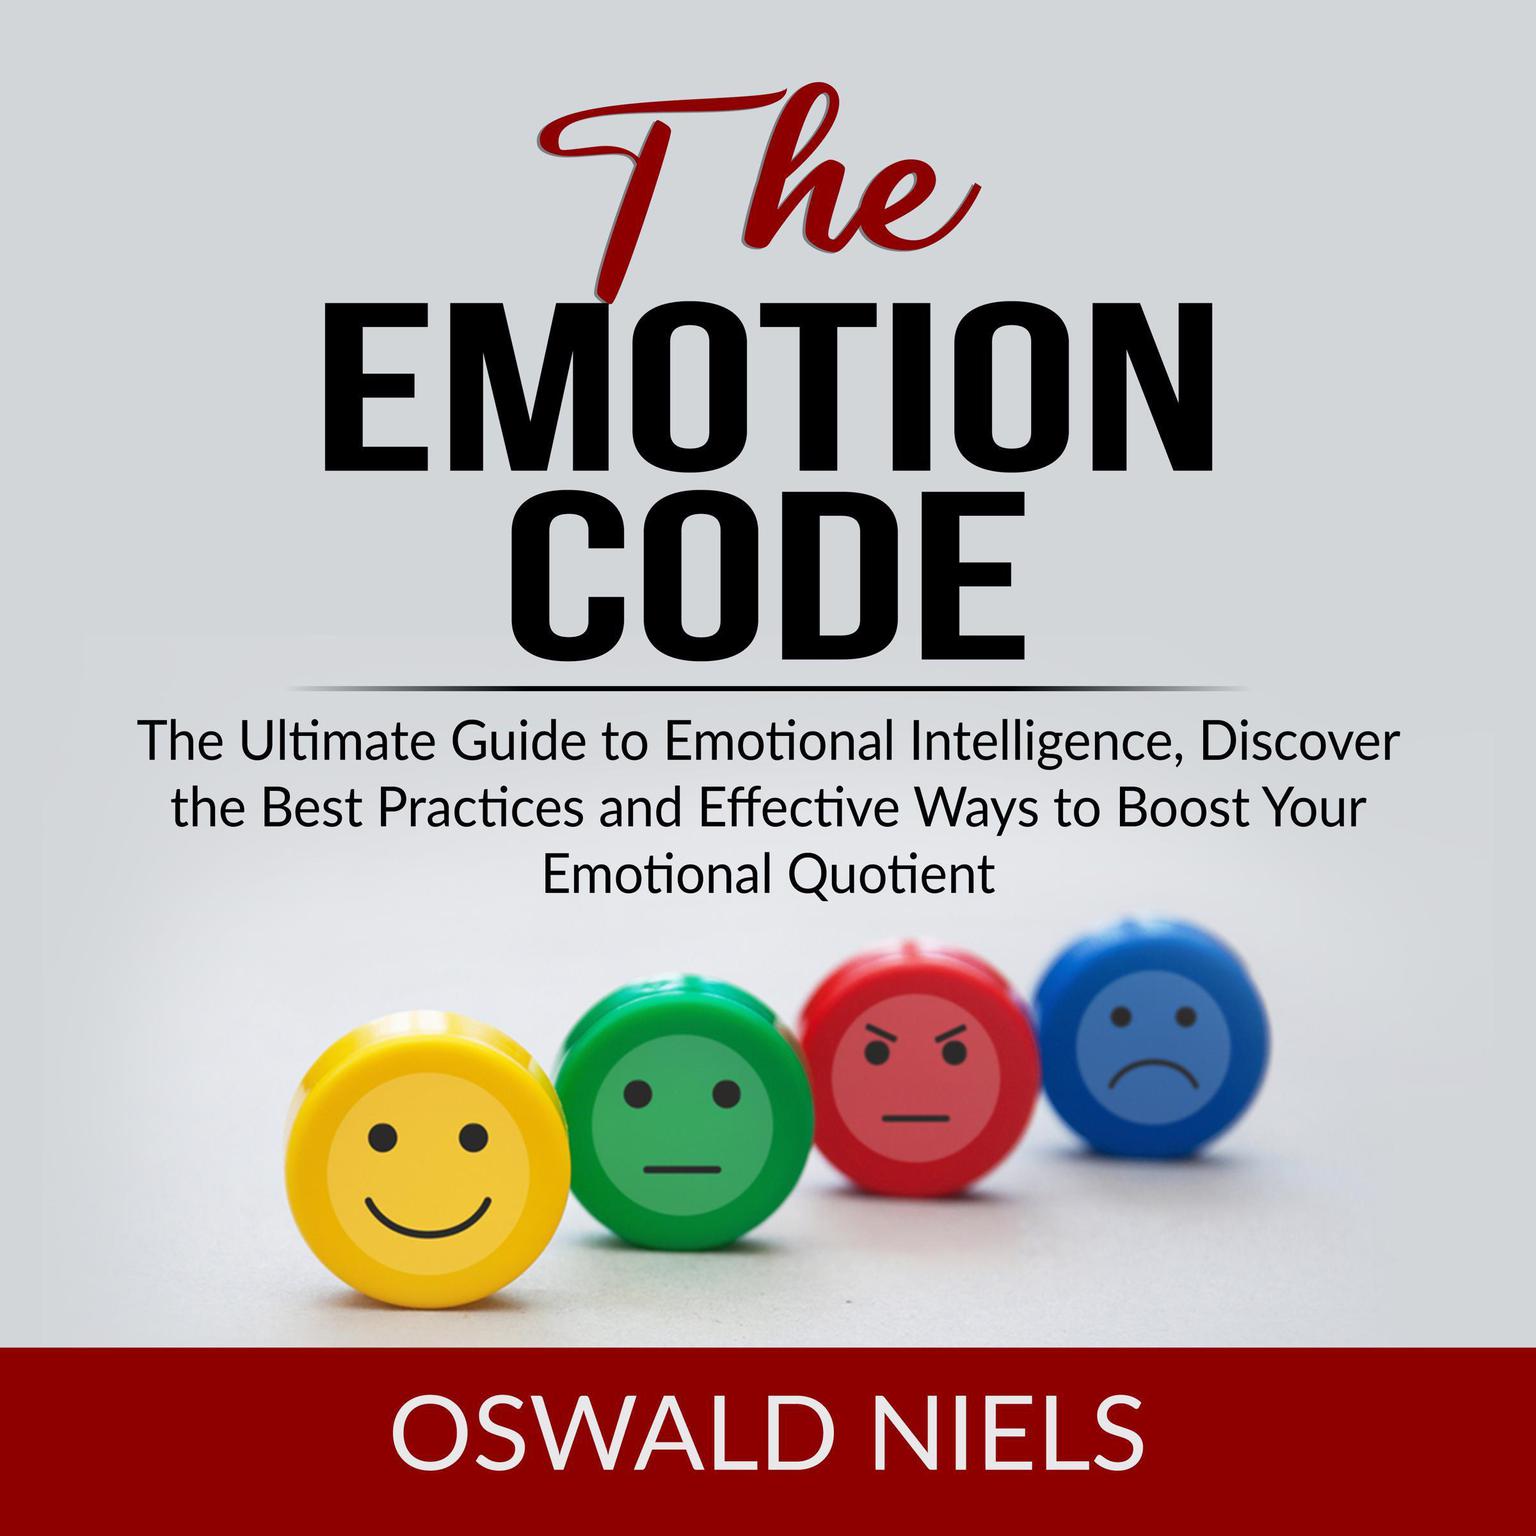 The Emotion Code: The Ultimate Guide to Emotional Intelligence, Discover the Best Practices and Effective Ways to Boost Your Emotional Quotient  Audiobook, by Oswald Niels